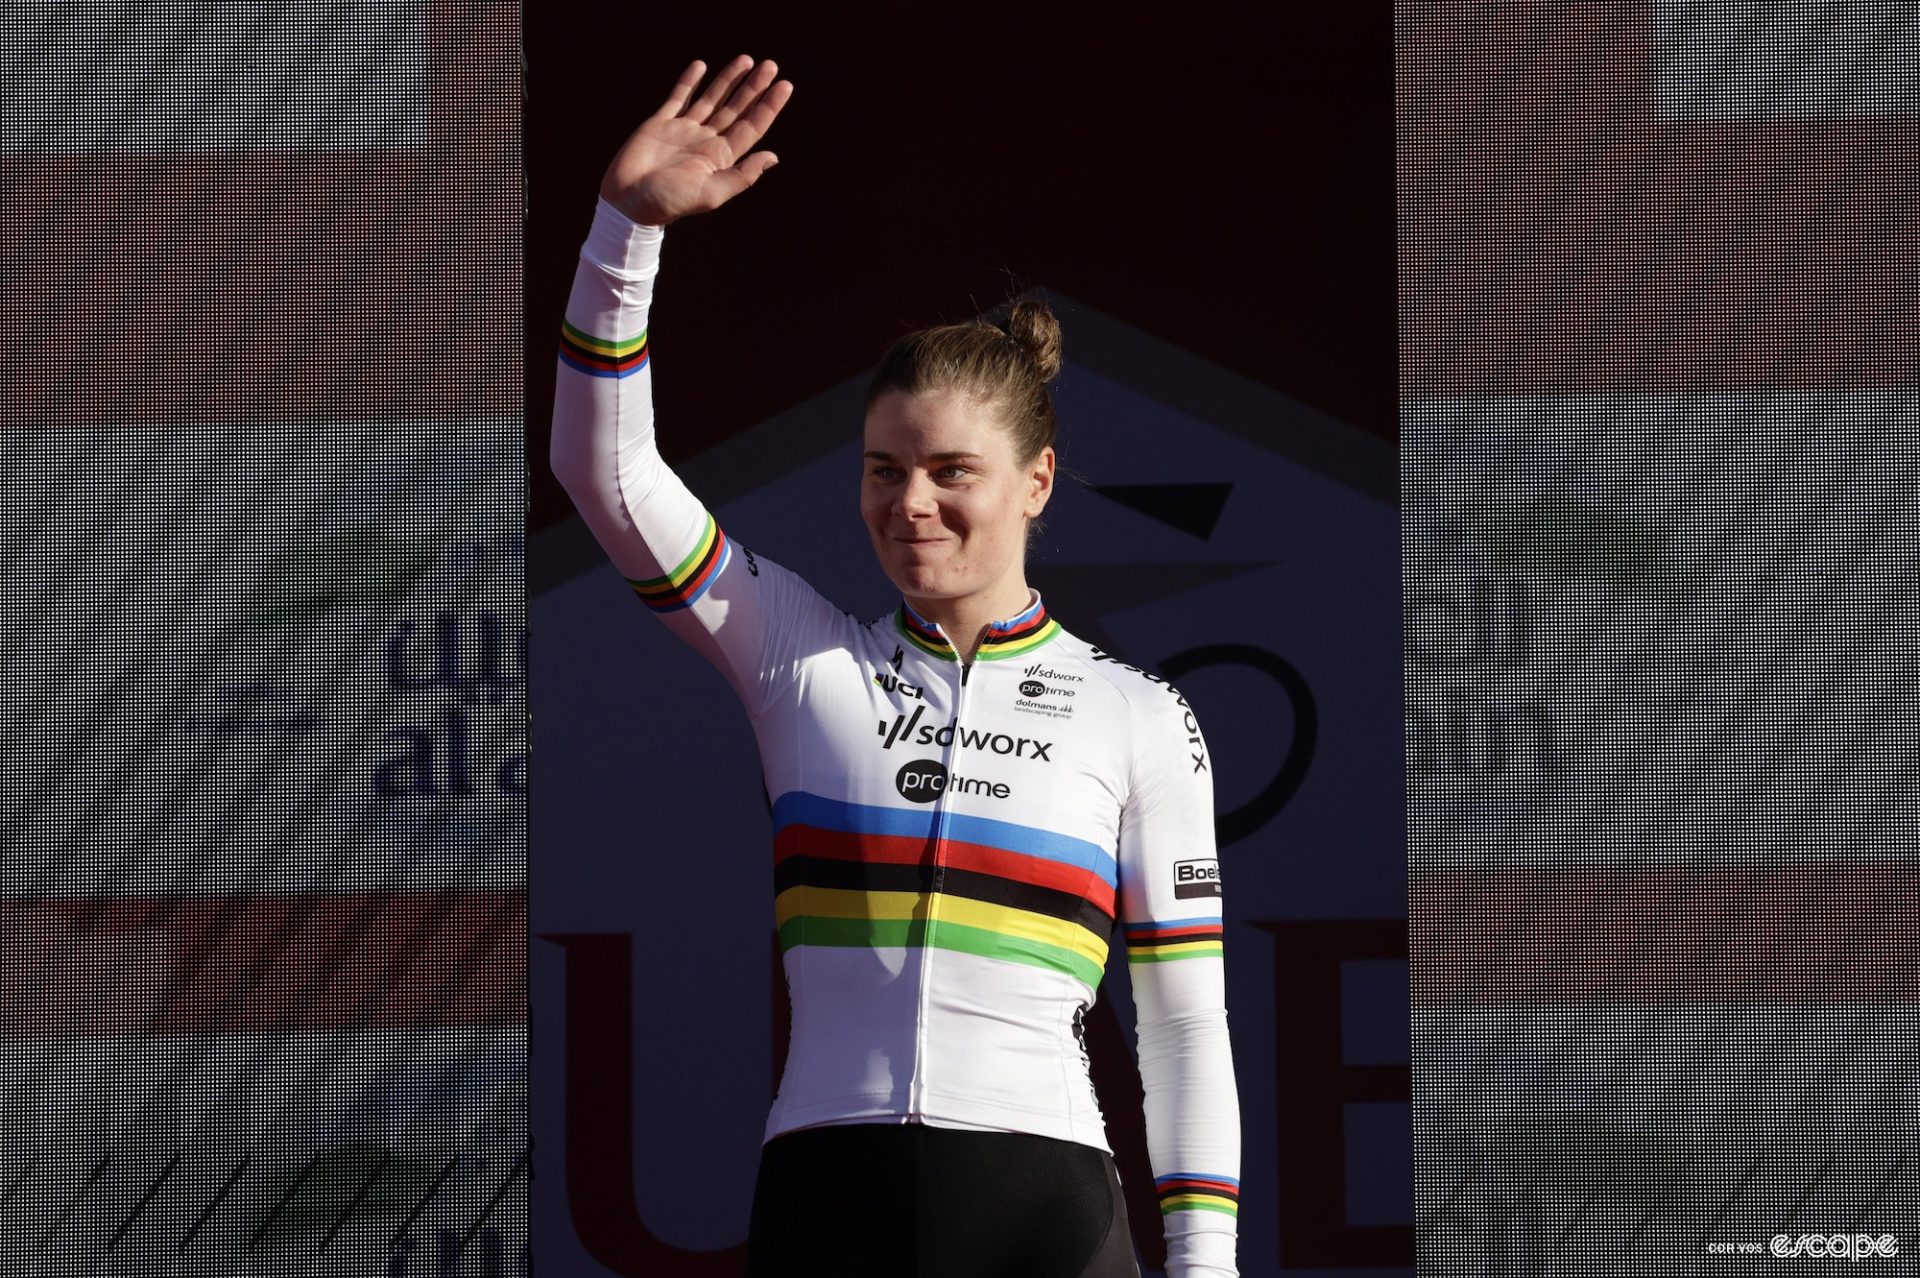 Kopecky in the world champion's jersey on the podium at the UAE Tour